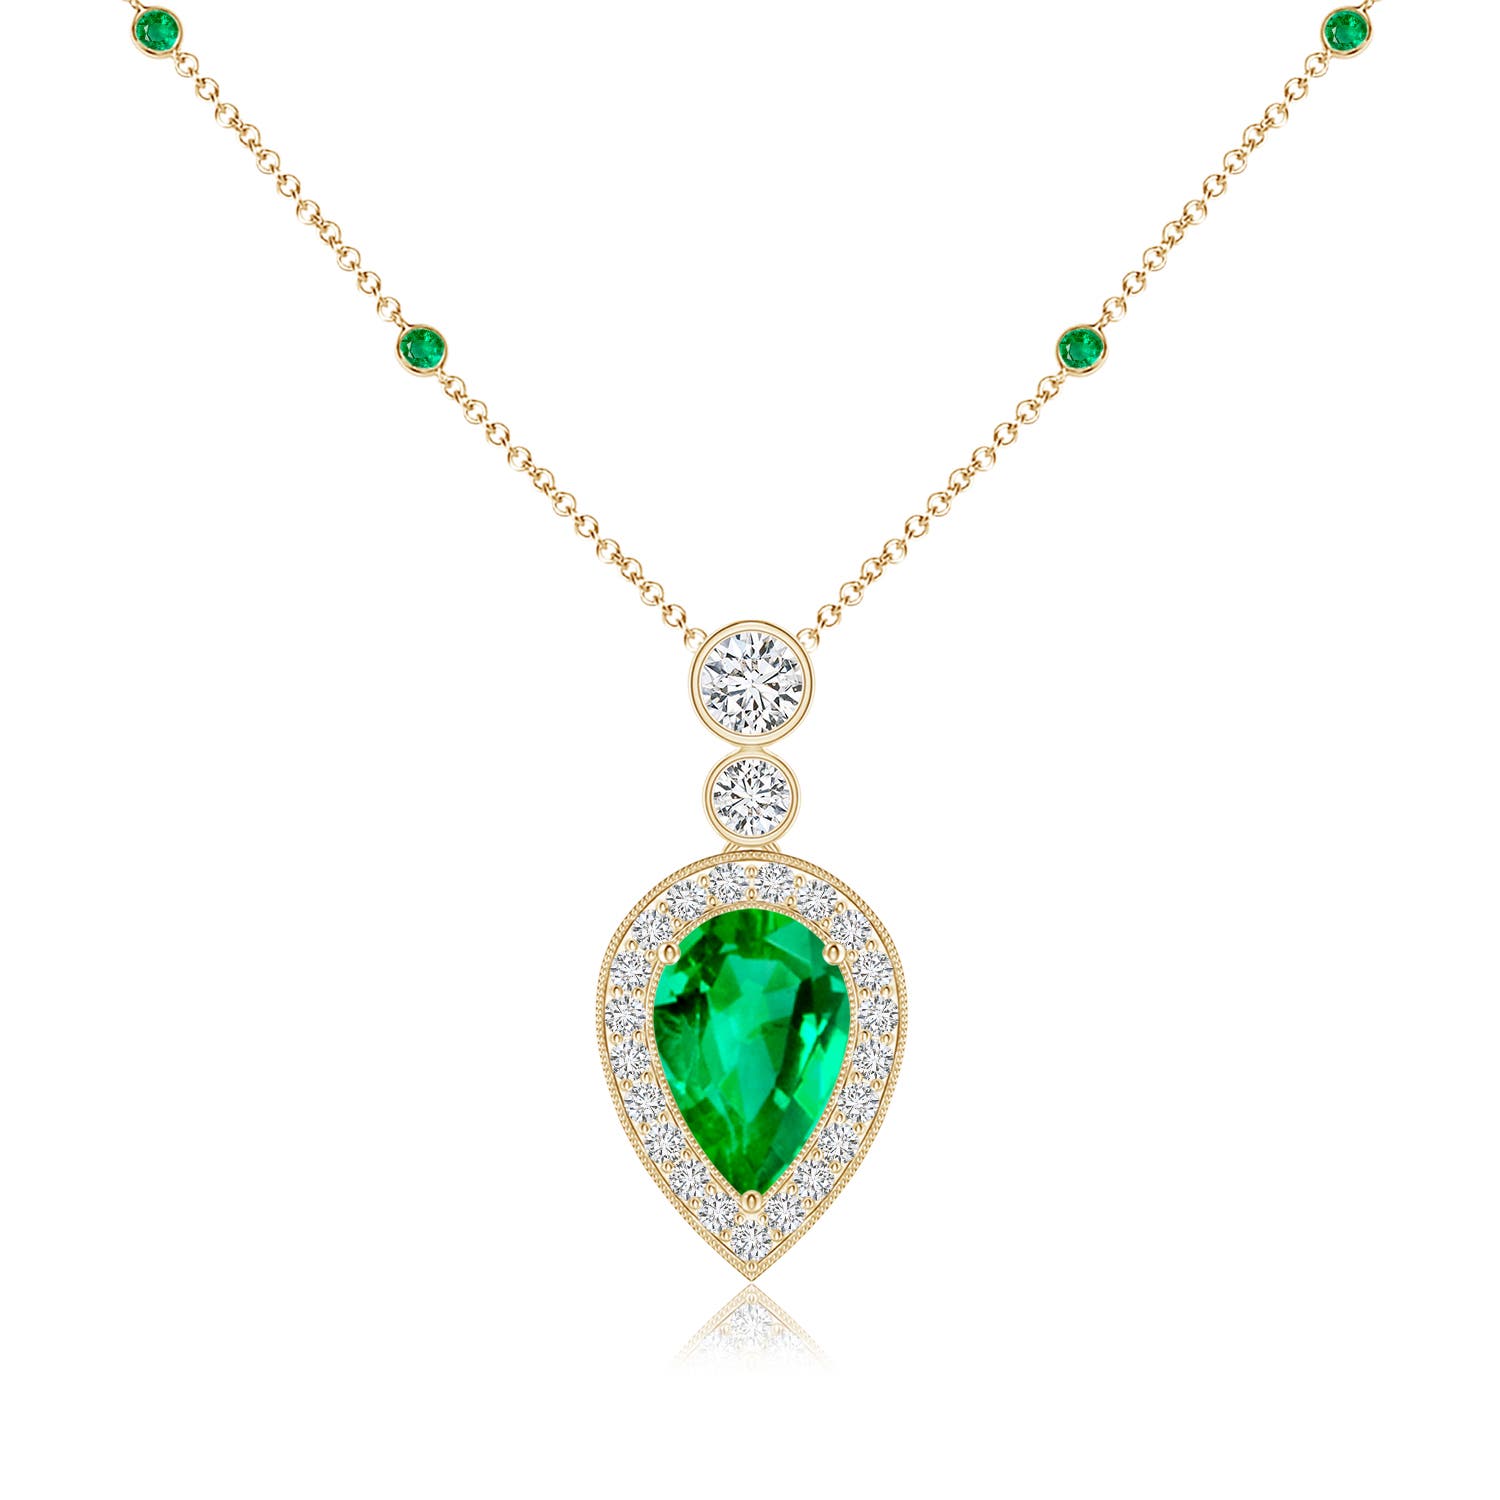 Inverted Pear Emerald Necklace with Diamonds